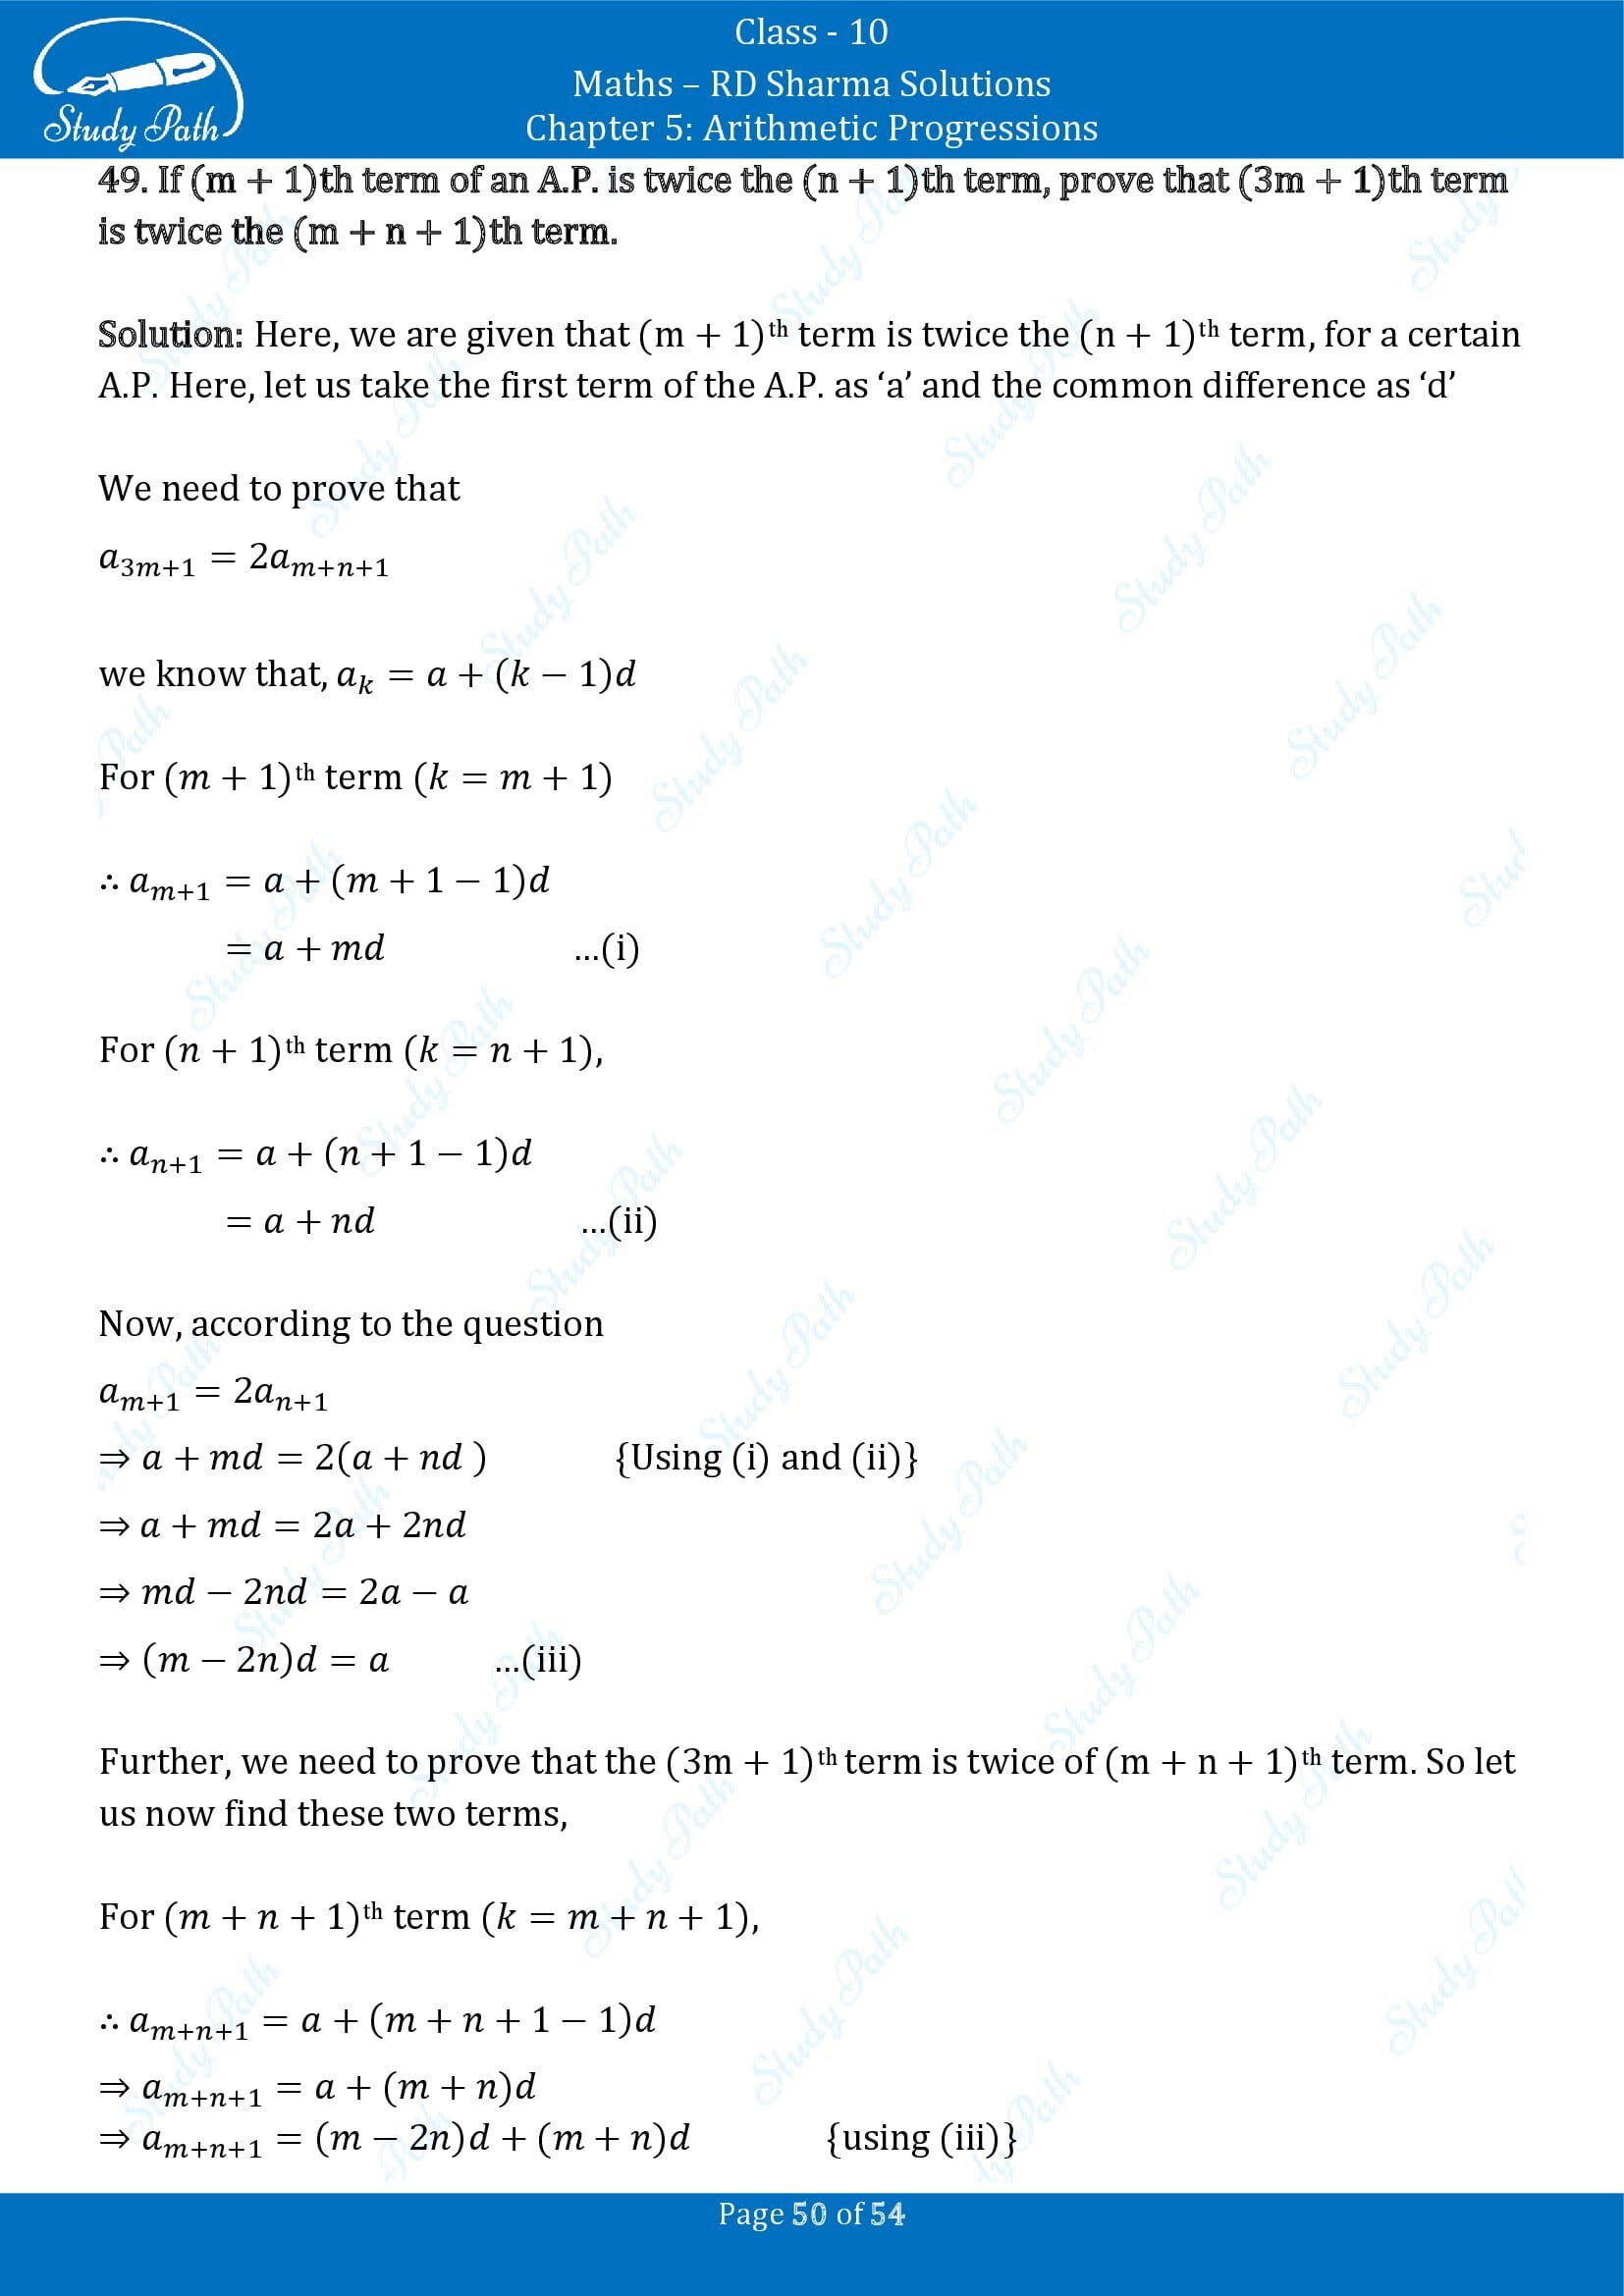 RD Sharma Solutions Class 10 Chapter 5 Arithmetic Progressions Exercise 5.4 00050